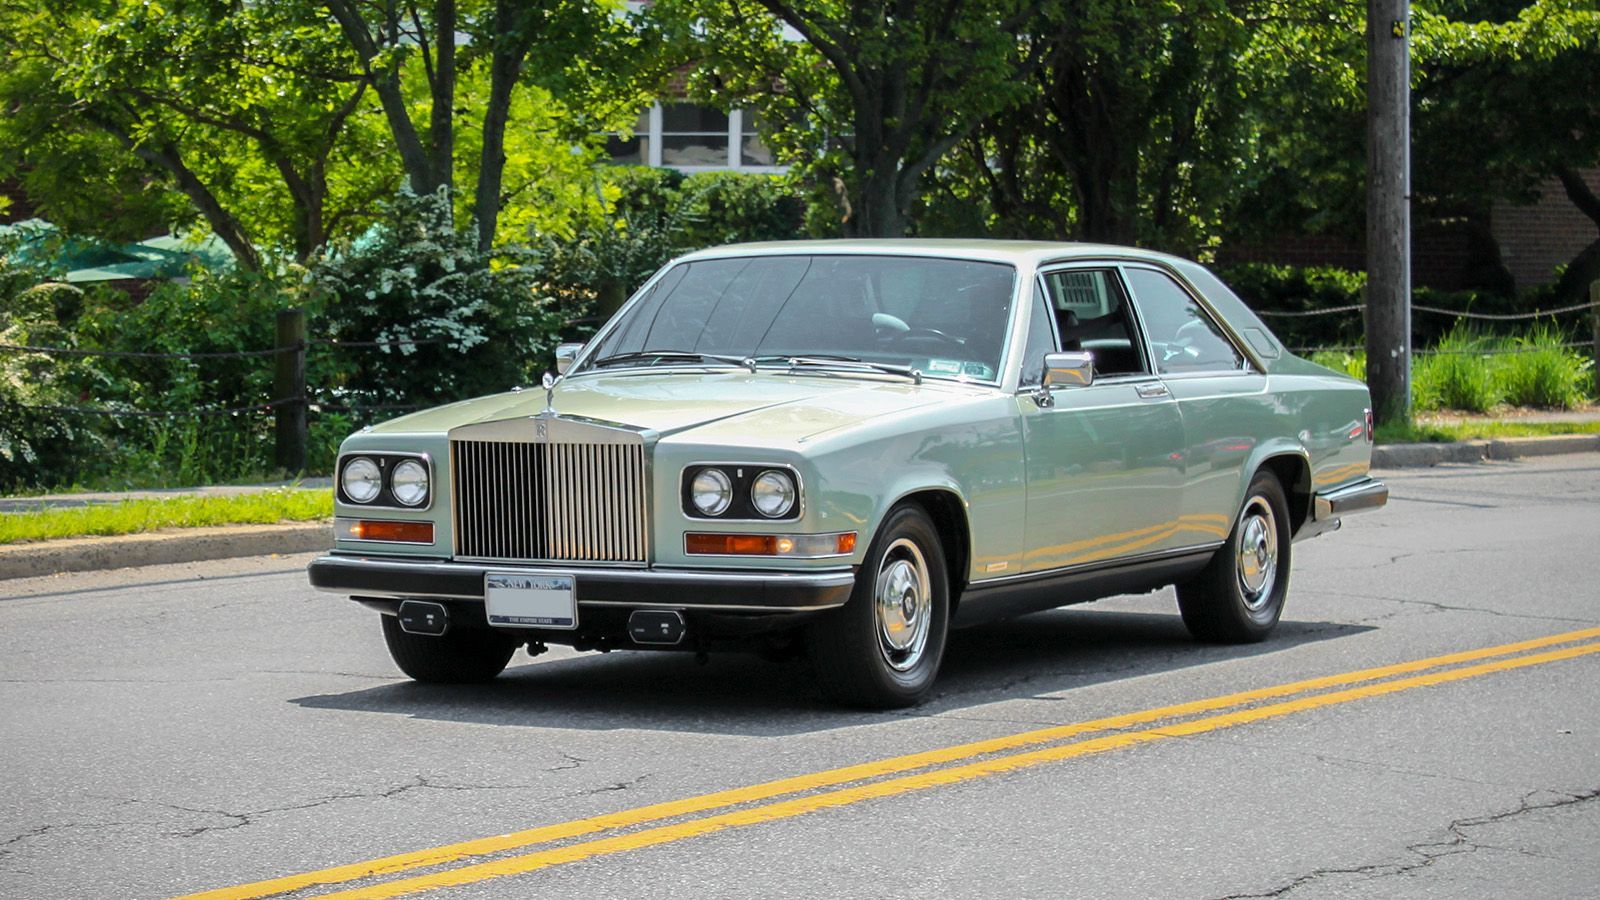 Rolls-Royce Camargue on the road